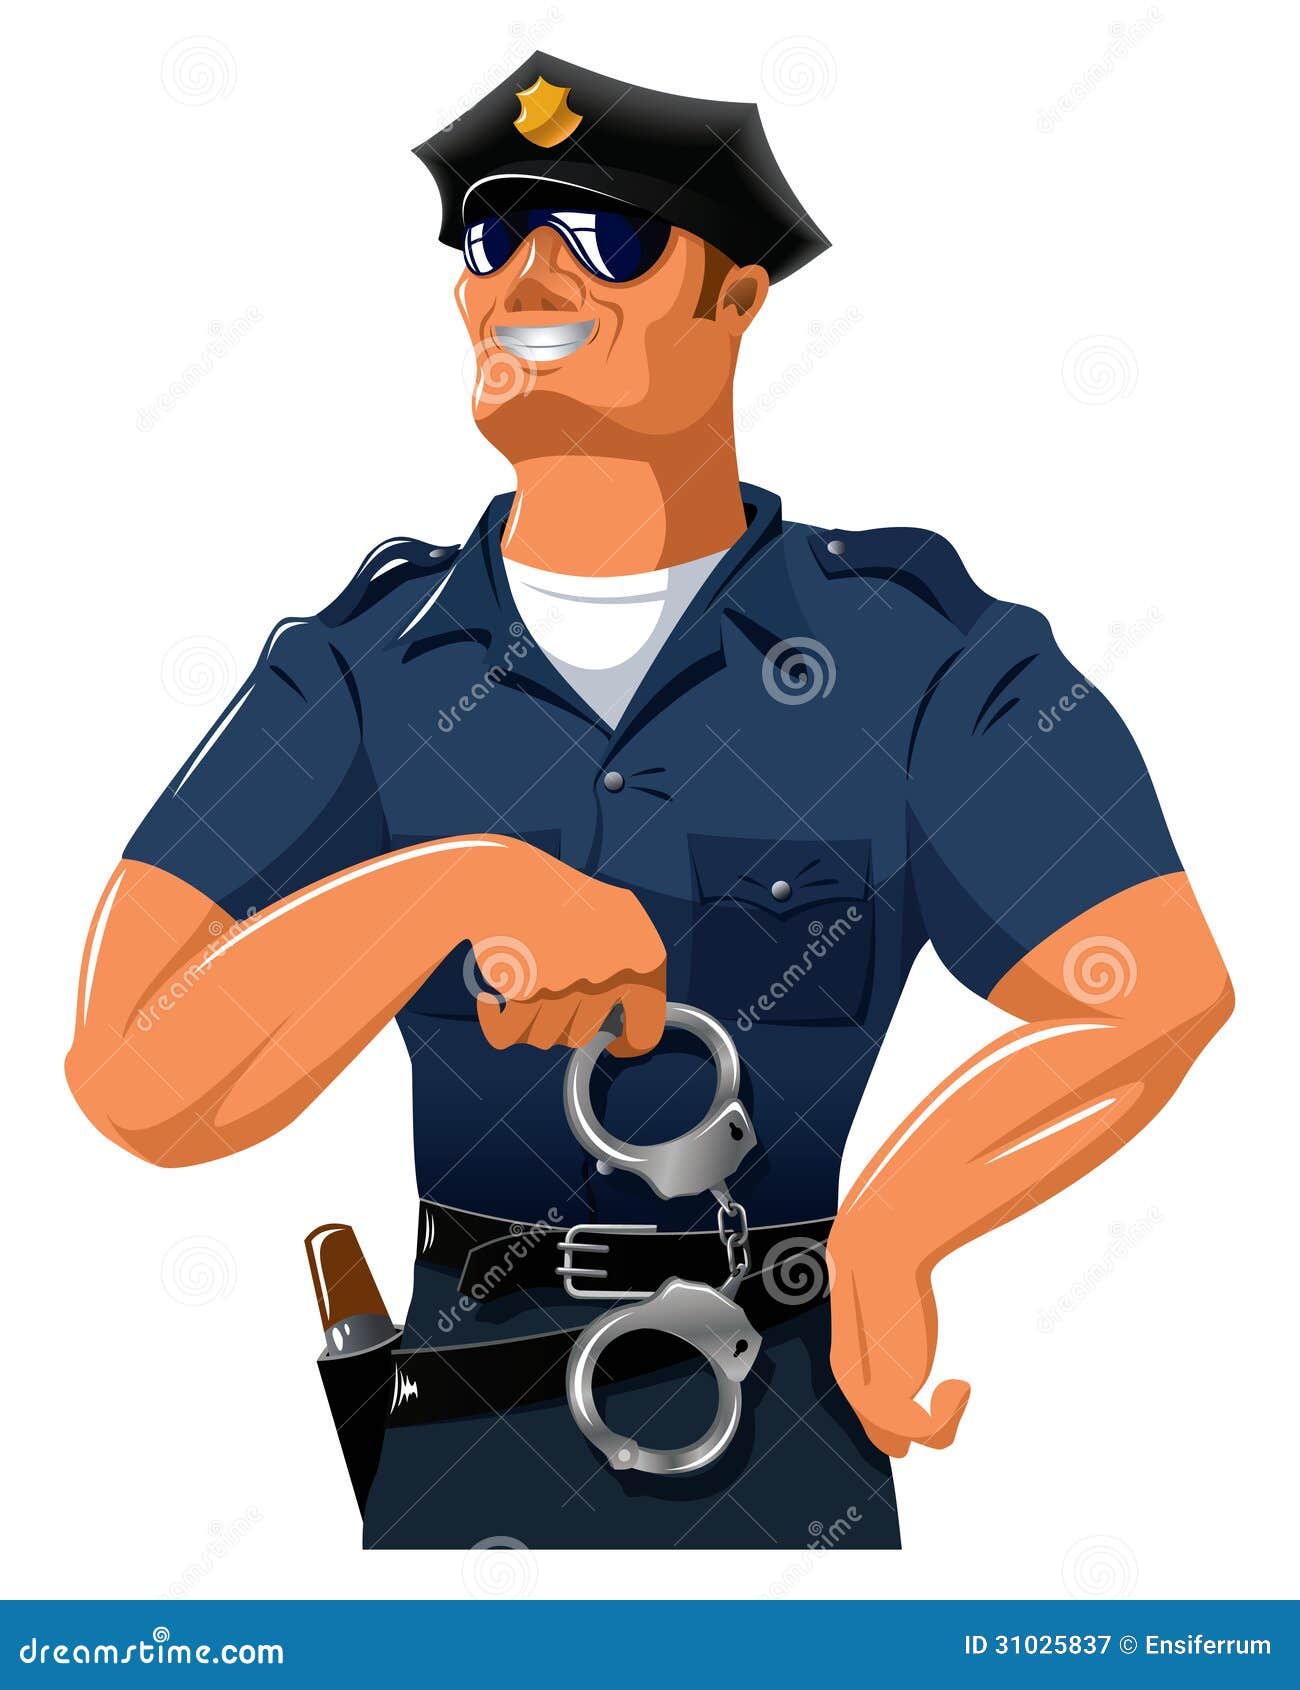 clipart photo of policeman - photo #28